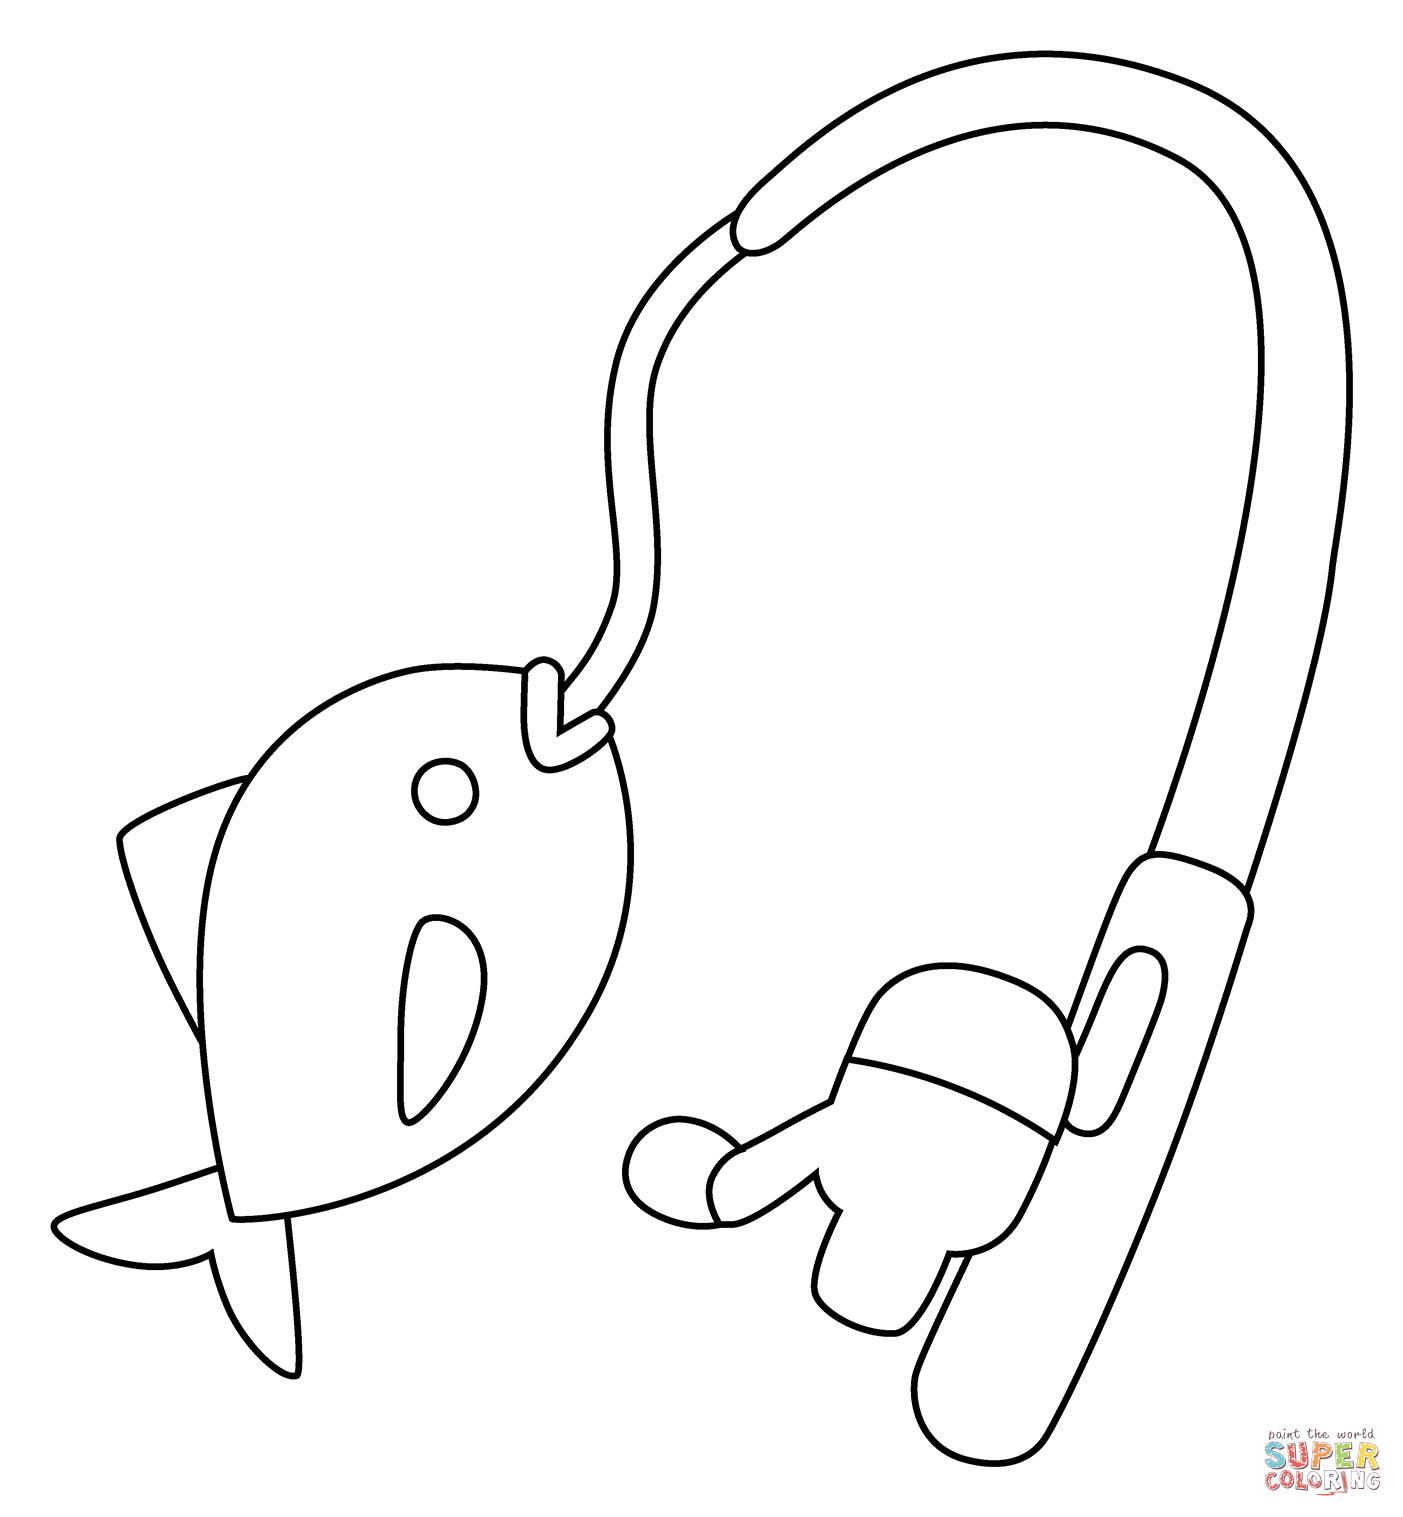 Fishing Pole Emoji coloring page | Free Printable Coloring Pages